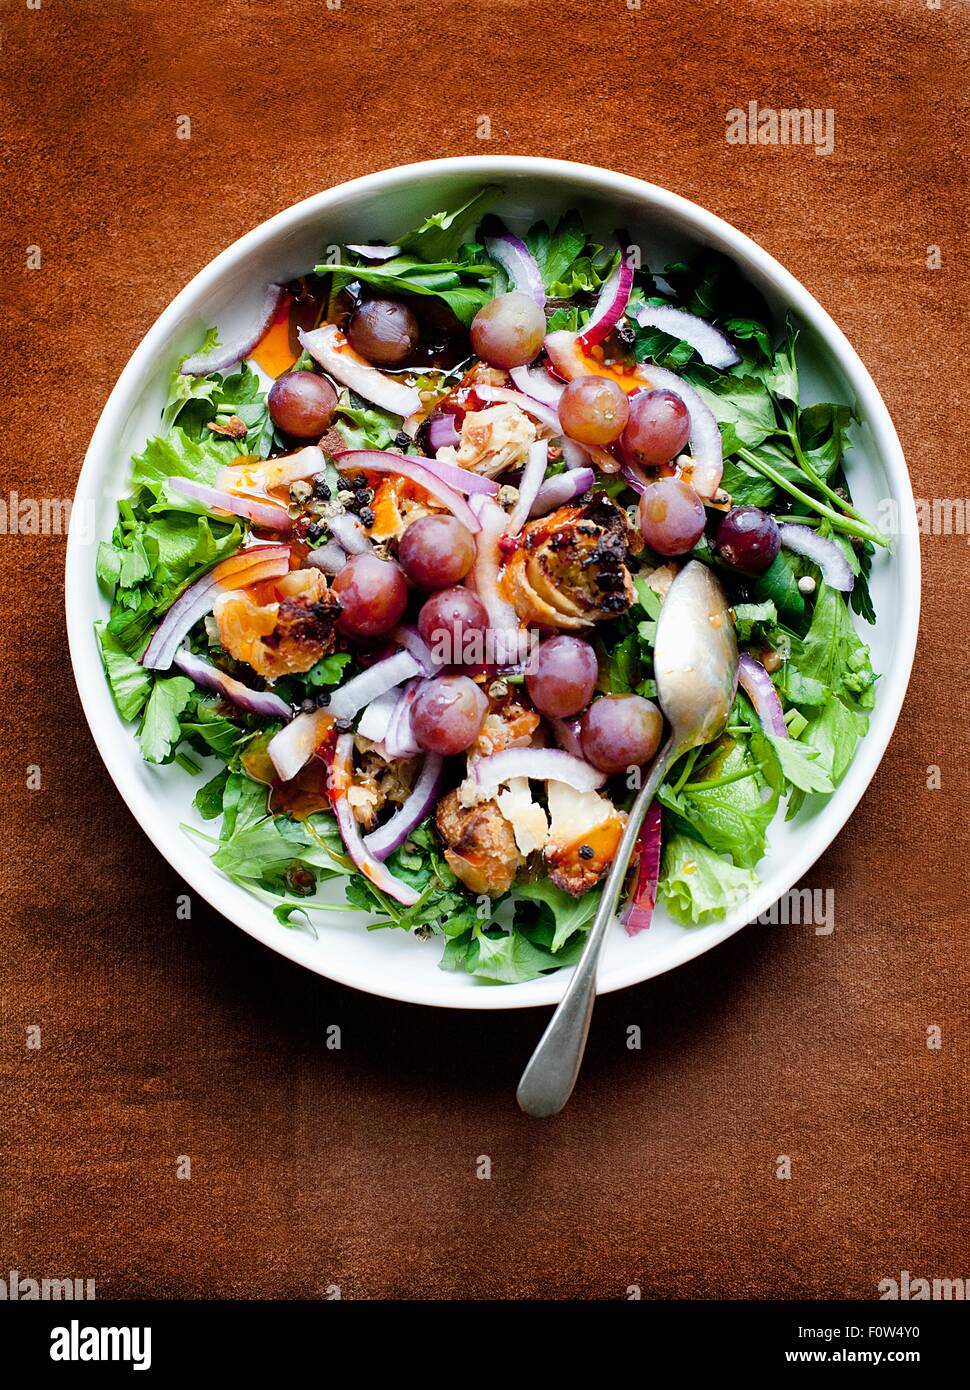 Bowl of mixed salad with red onion and black grapes Stock Photo